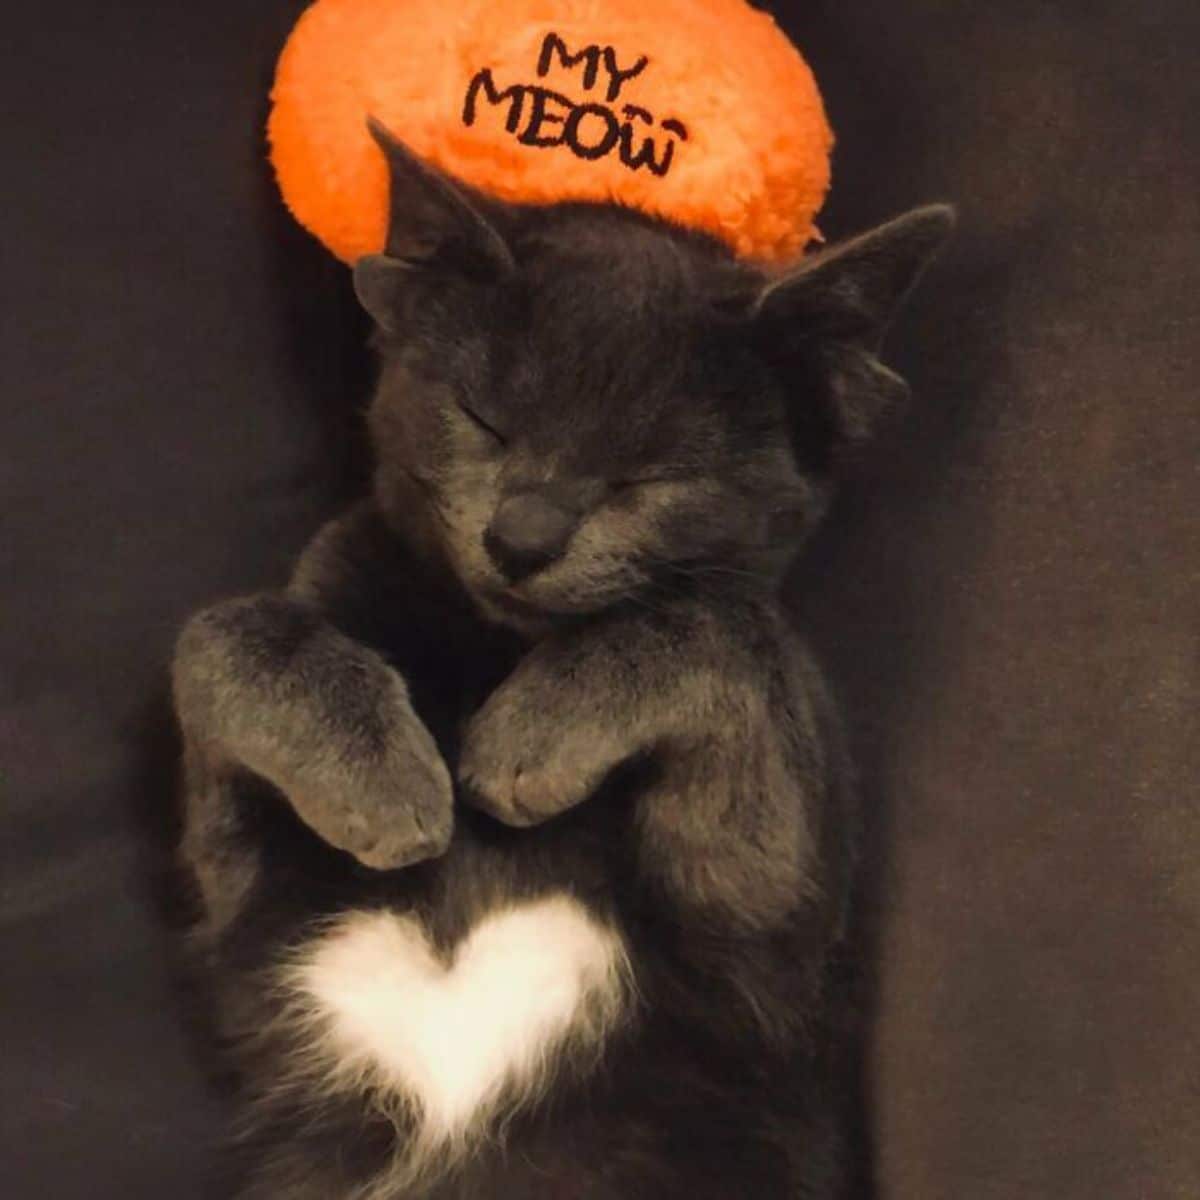 grey kitten with four ears sleeping belly up with an orange stuffed toy behind the head that says my meow